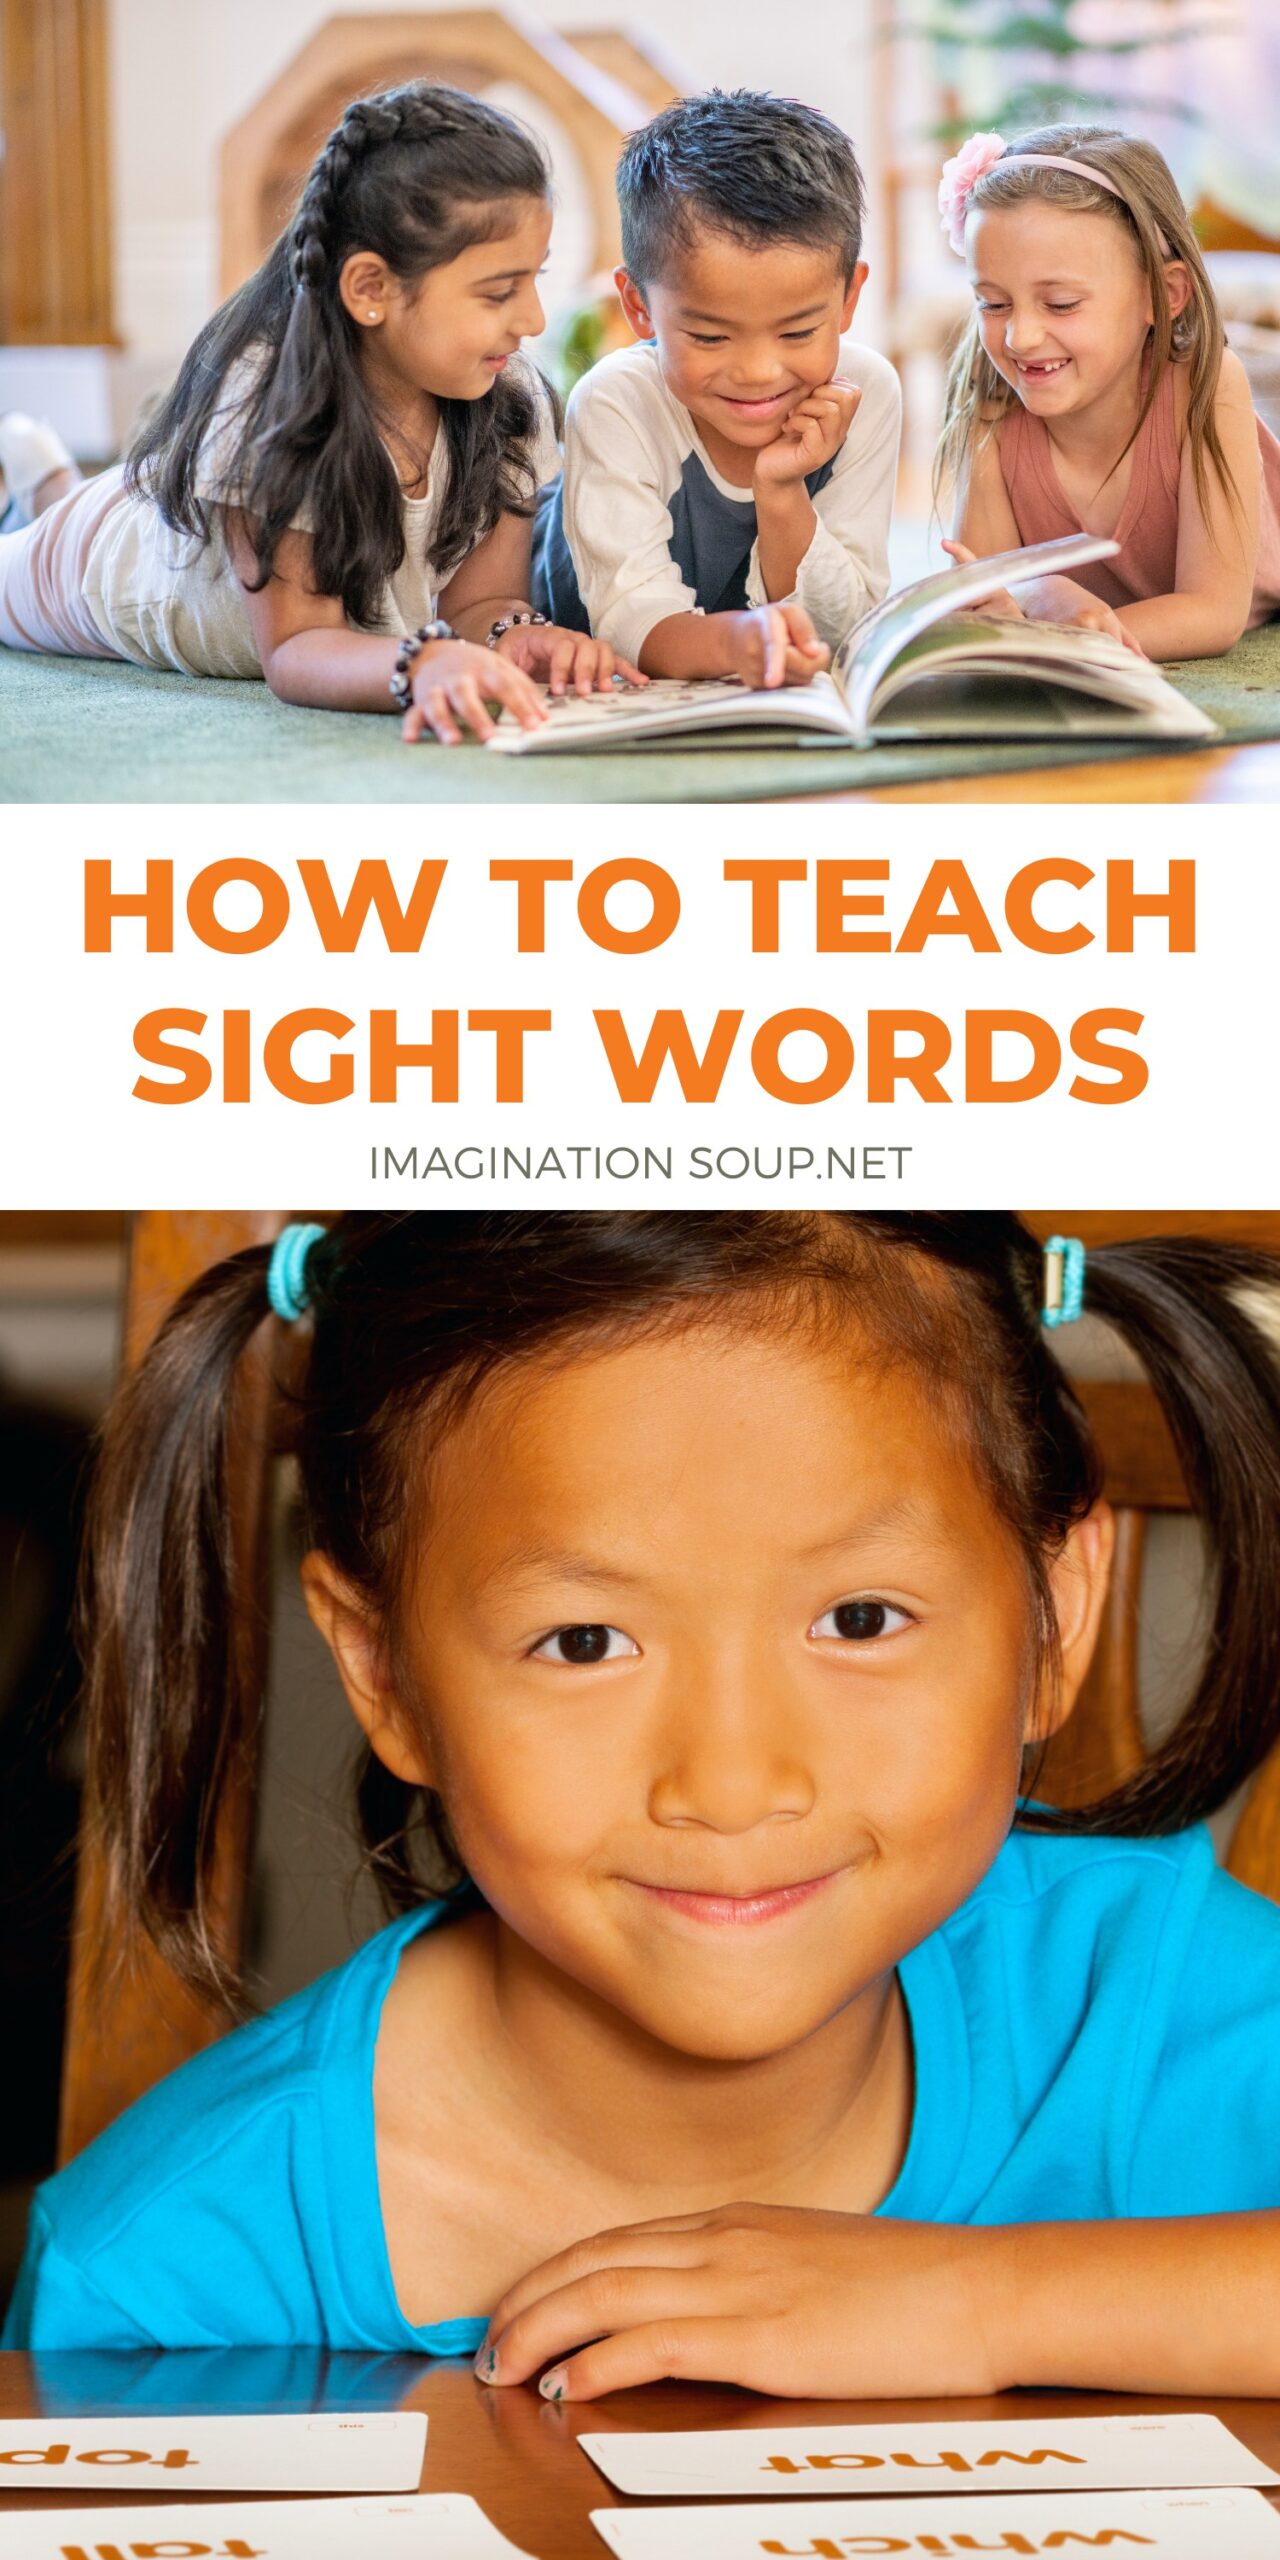 As a reading teacher, I can show you how to teach sight words from years of experience. When I first started teaching, I erroneously thought children must memorize sight words. Yet after teaching for a few years, I realized that this memorization only practice wasn’t always effective or the best practice for learners. 